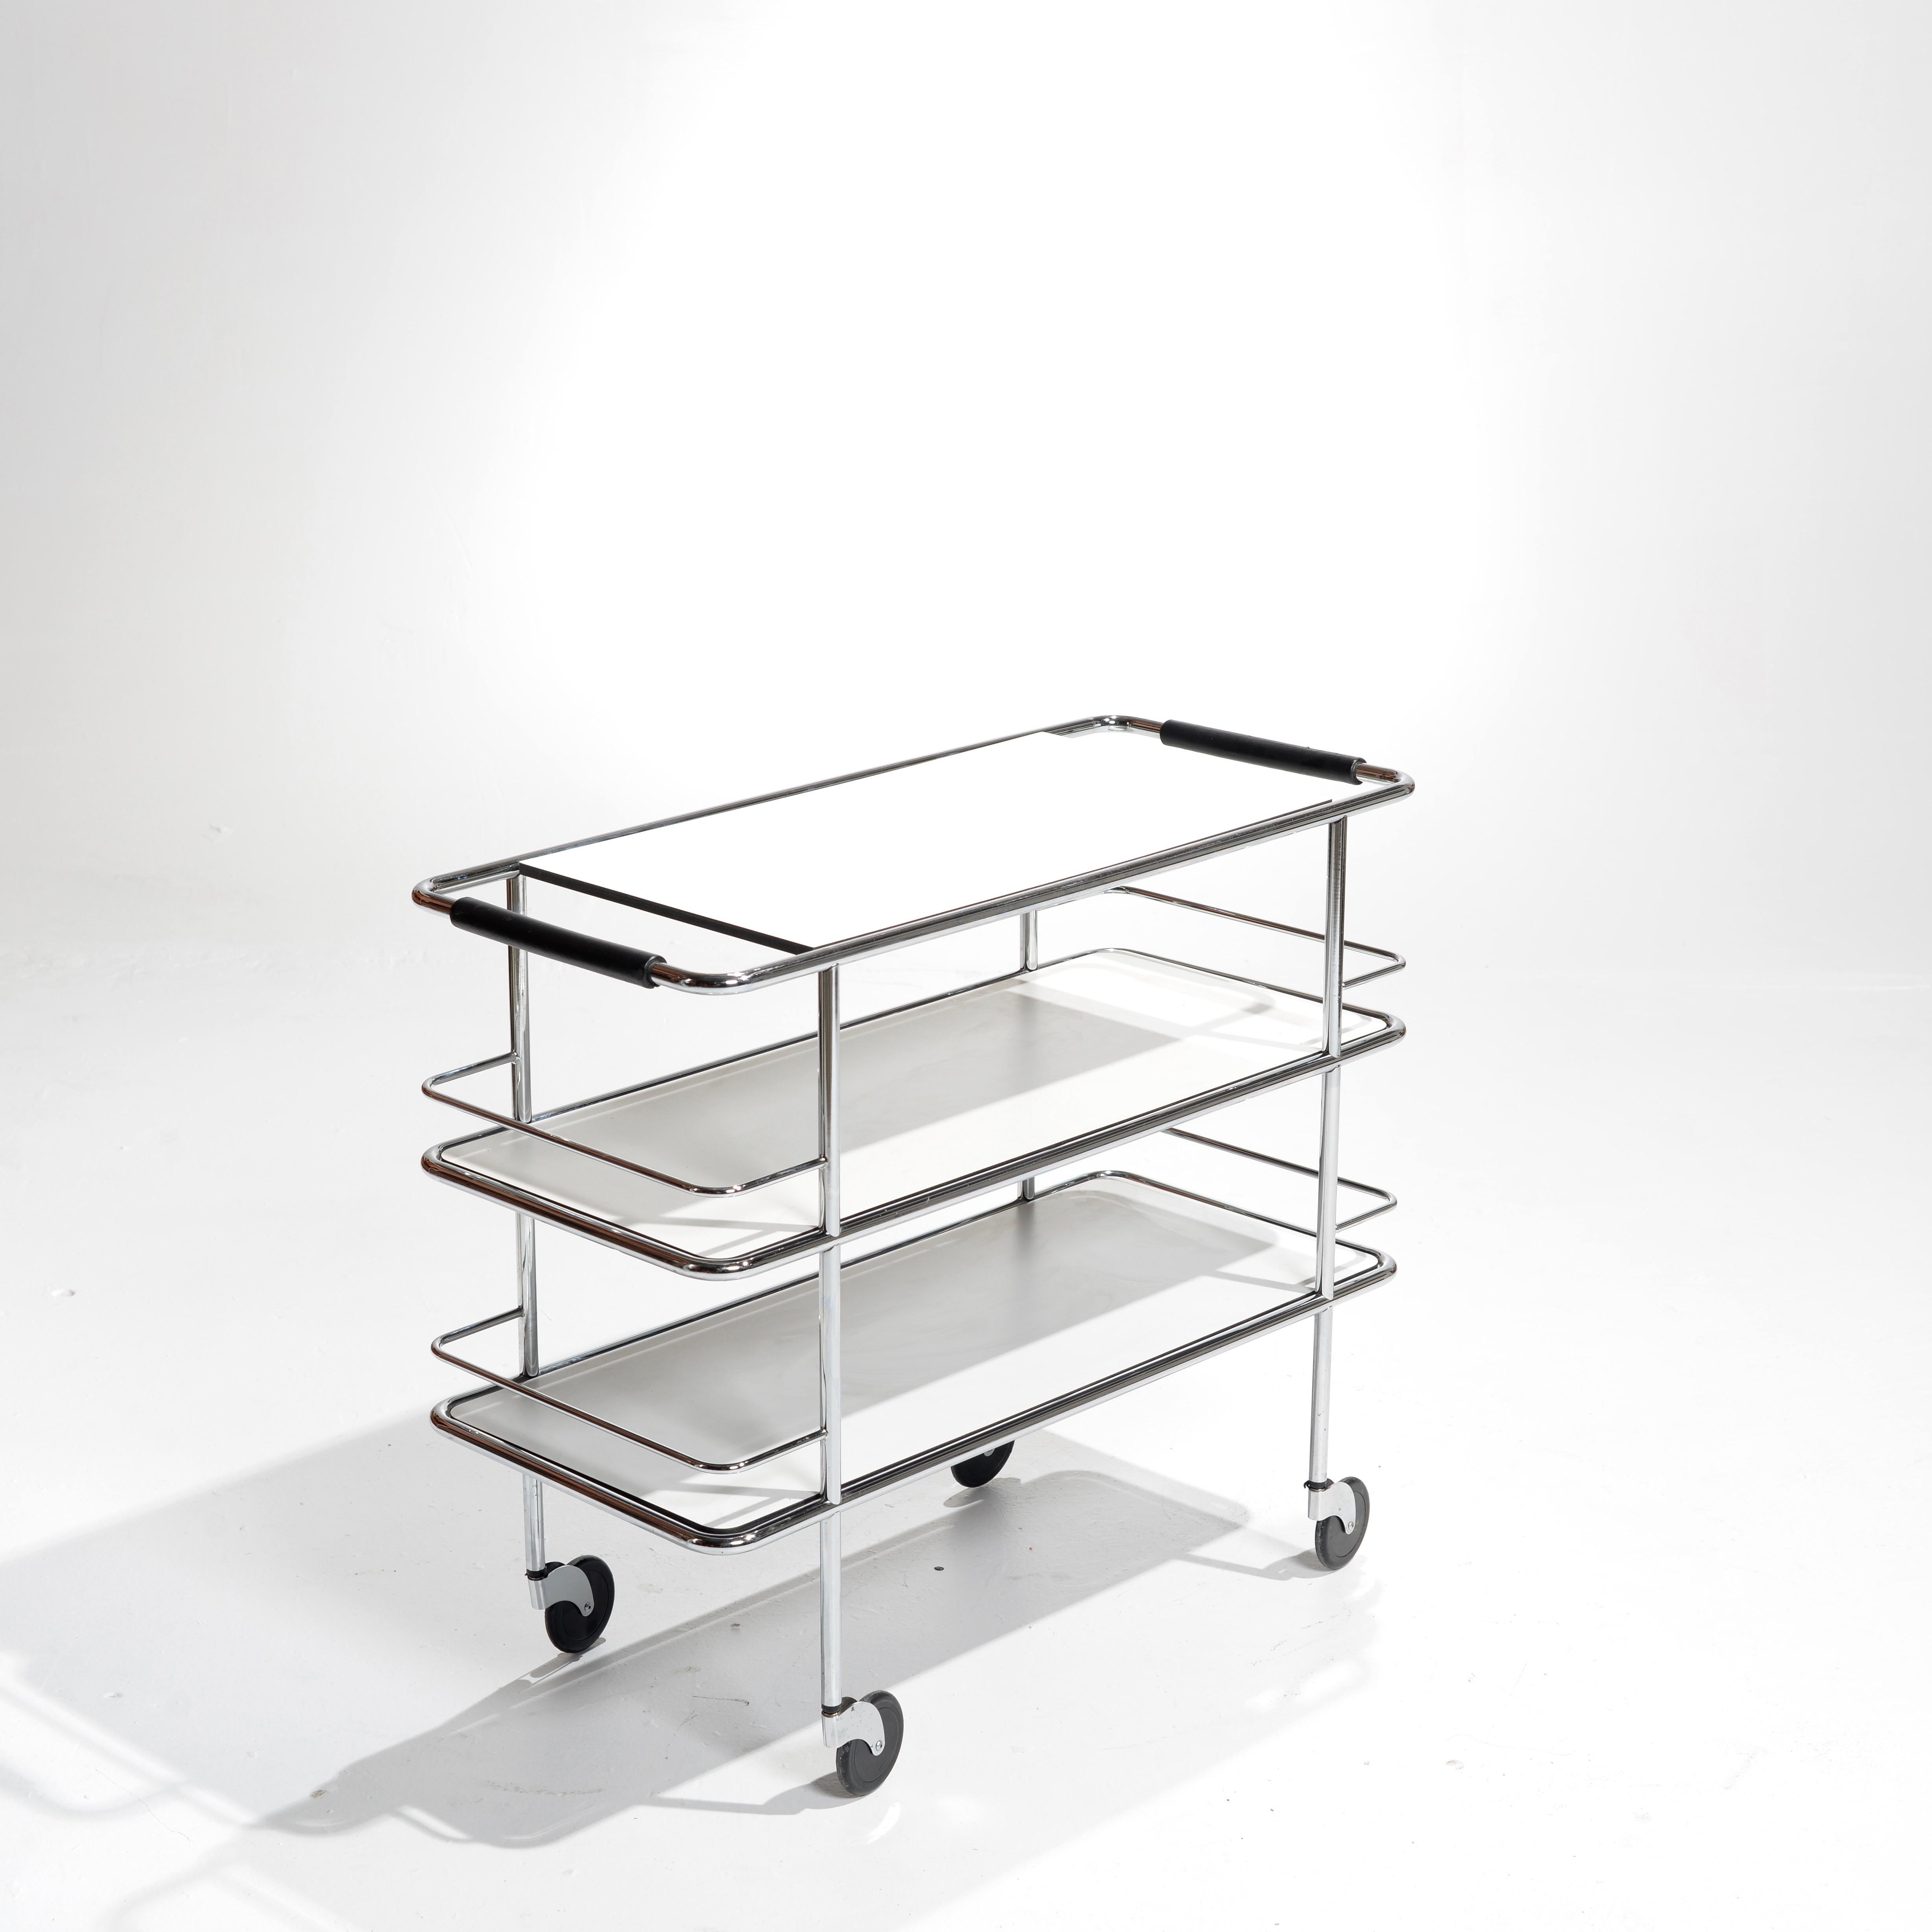 This cart brings utility and grace together, either as a sideboard in the home or as a bar or serving trolley around the dining areas of a restaurant.